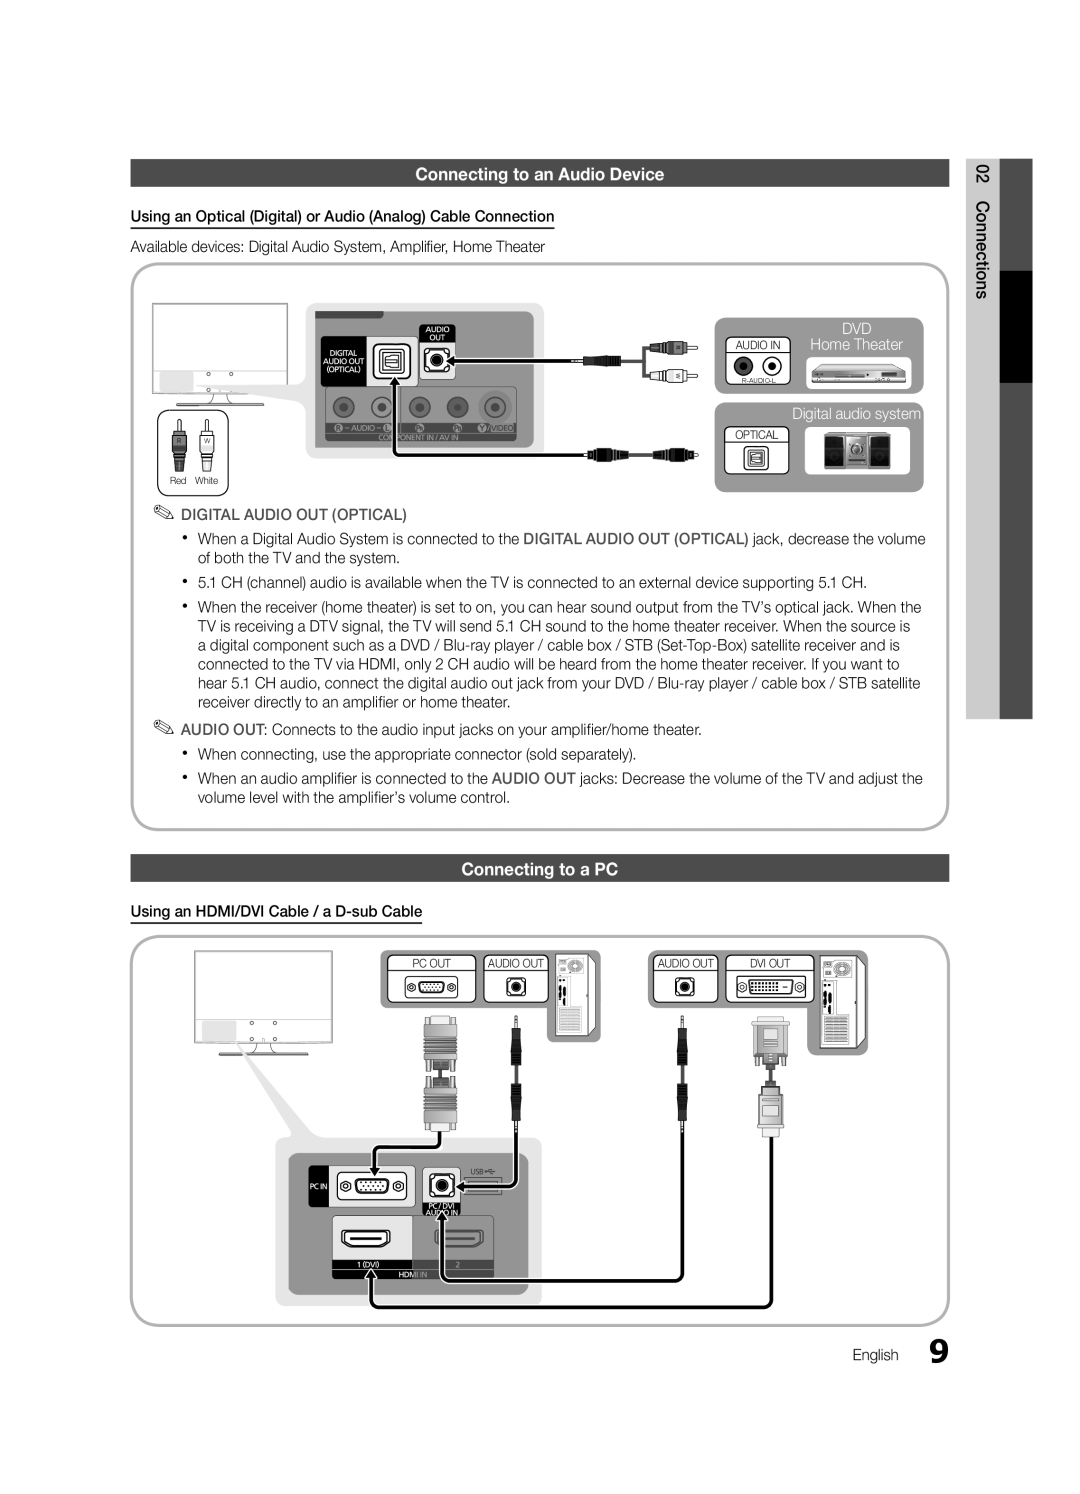 Samsung BN68-02620B-06 user manual Connecting to an Audio Device, Connecting to a PC, Digital Audio Out Optical 